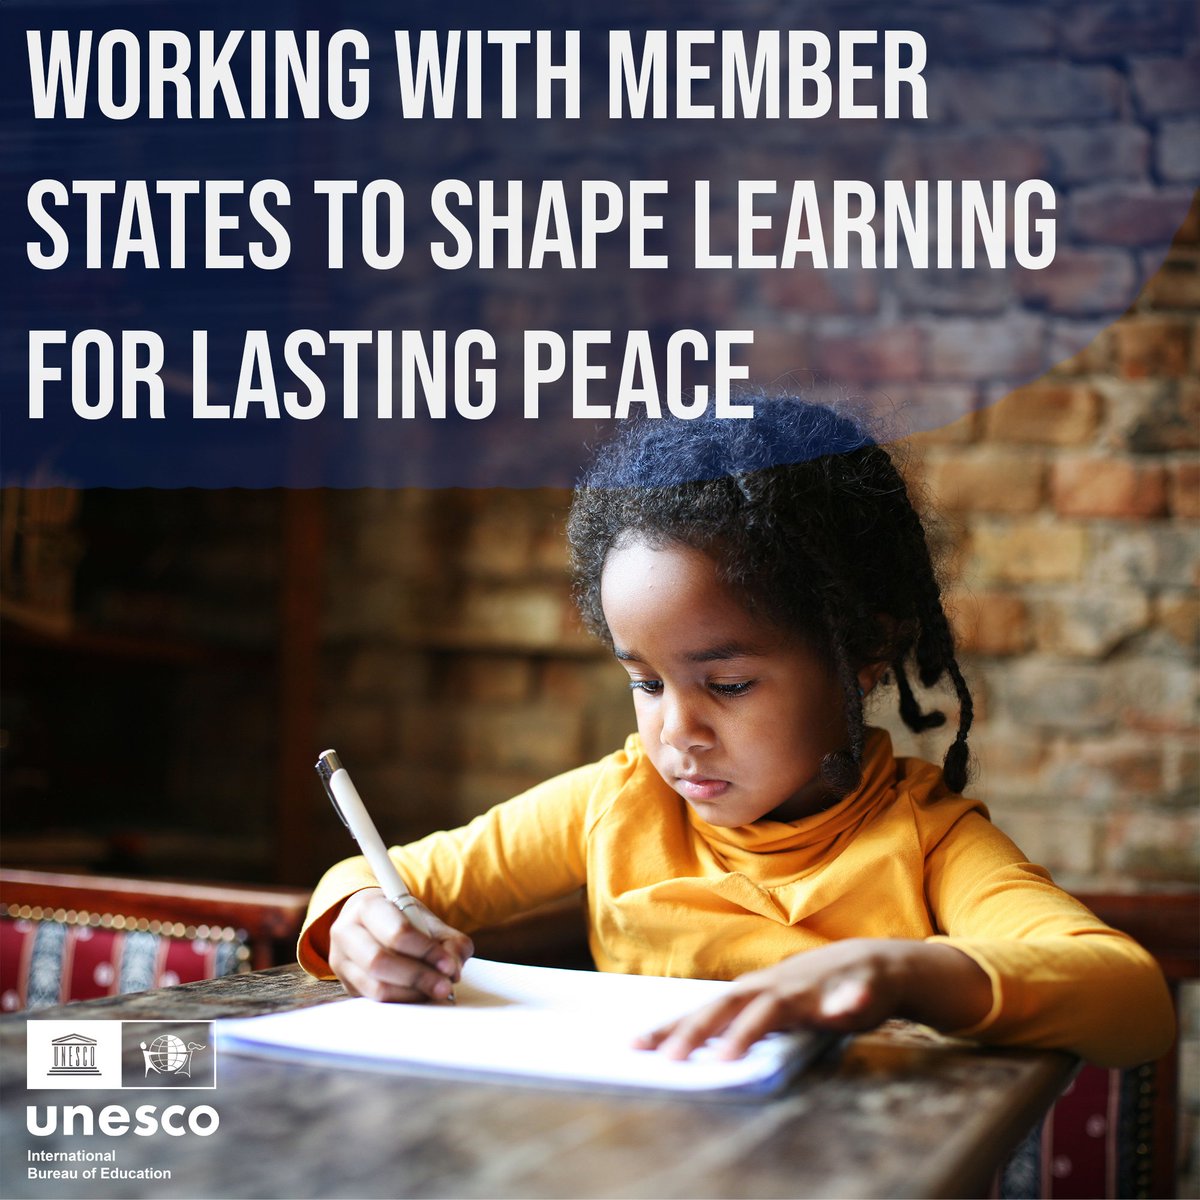 UNESCO-IBE works with Member States to shape curriculum for lasting peace. ibe.unesco.org/en/articles/in… #EducationDay #Peacebuilding